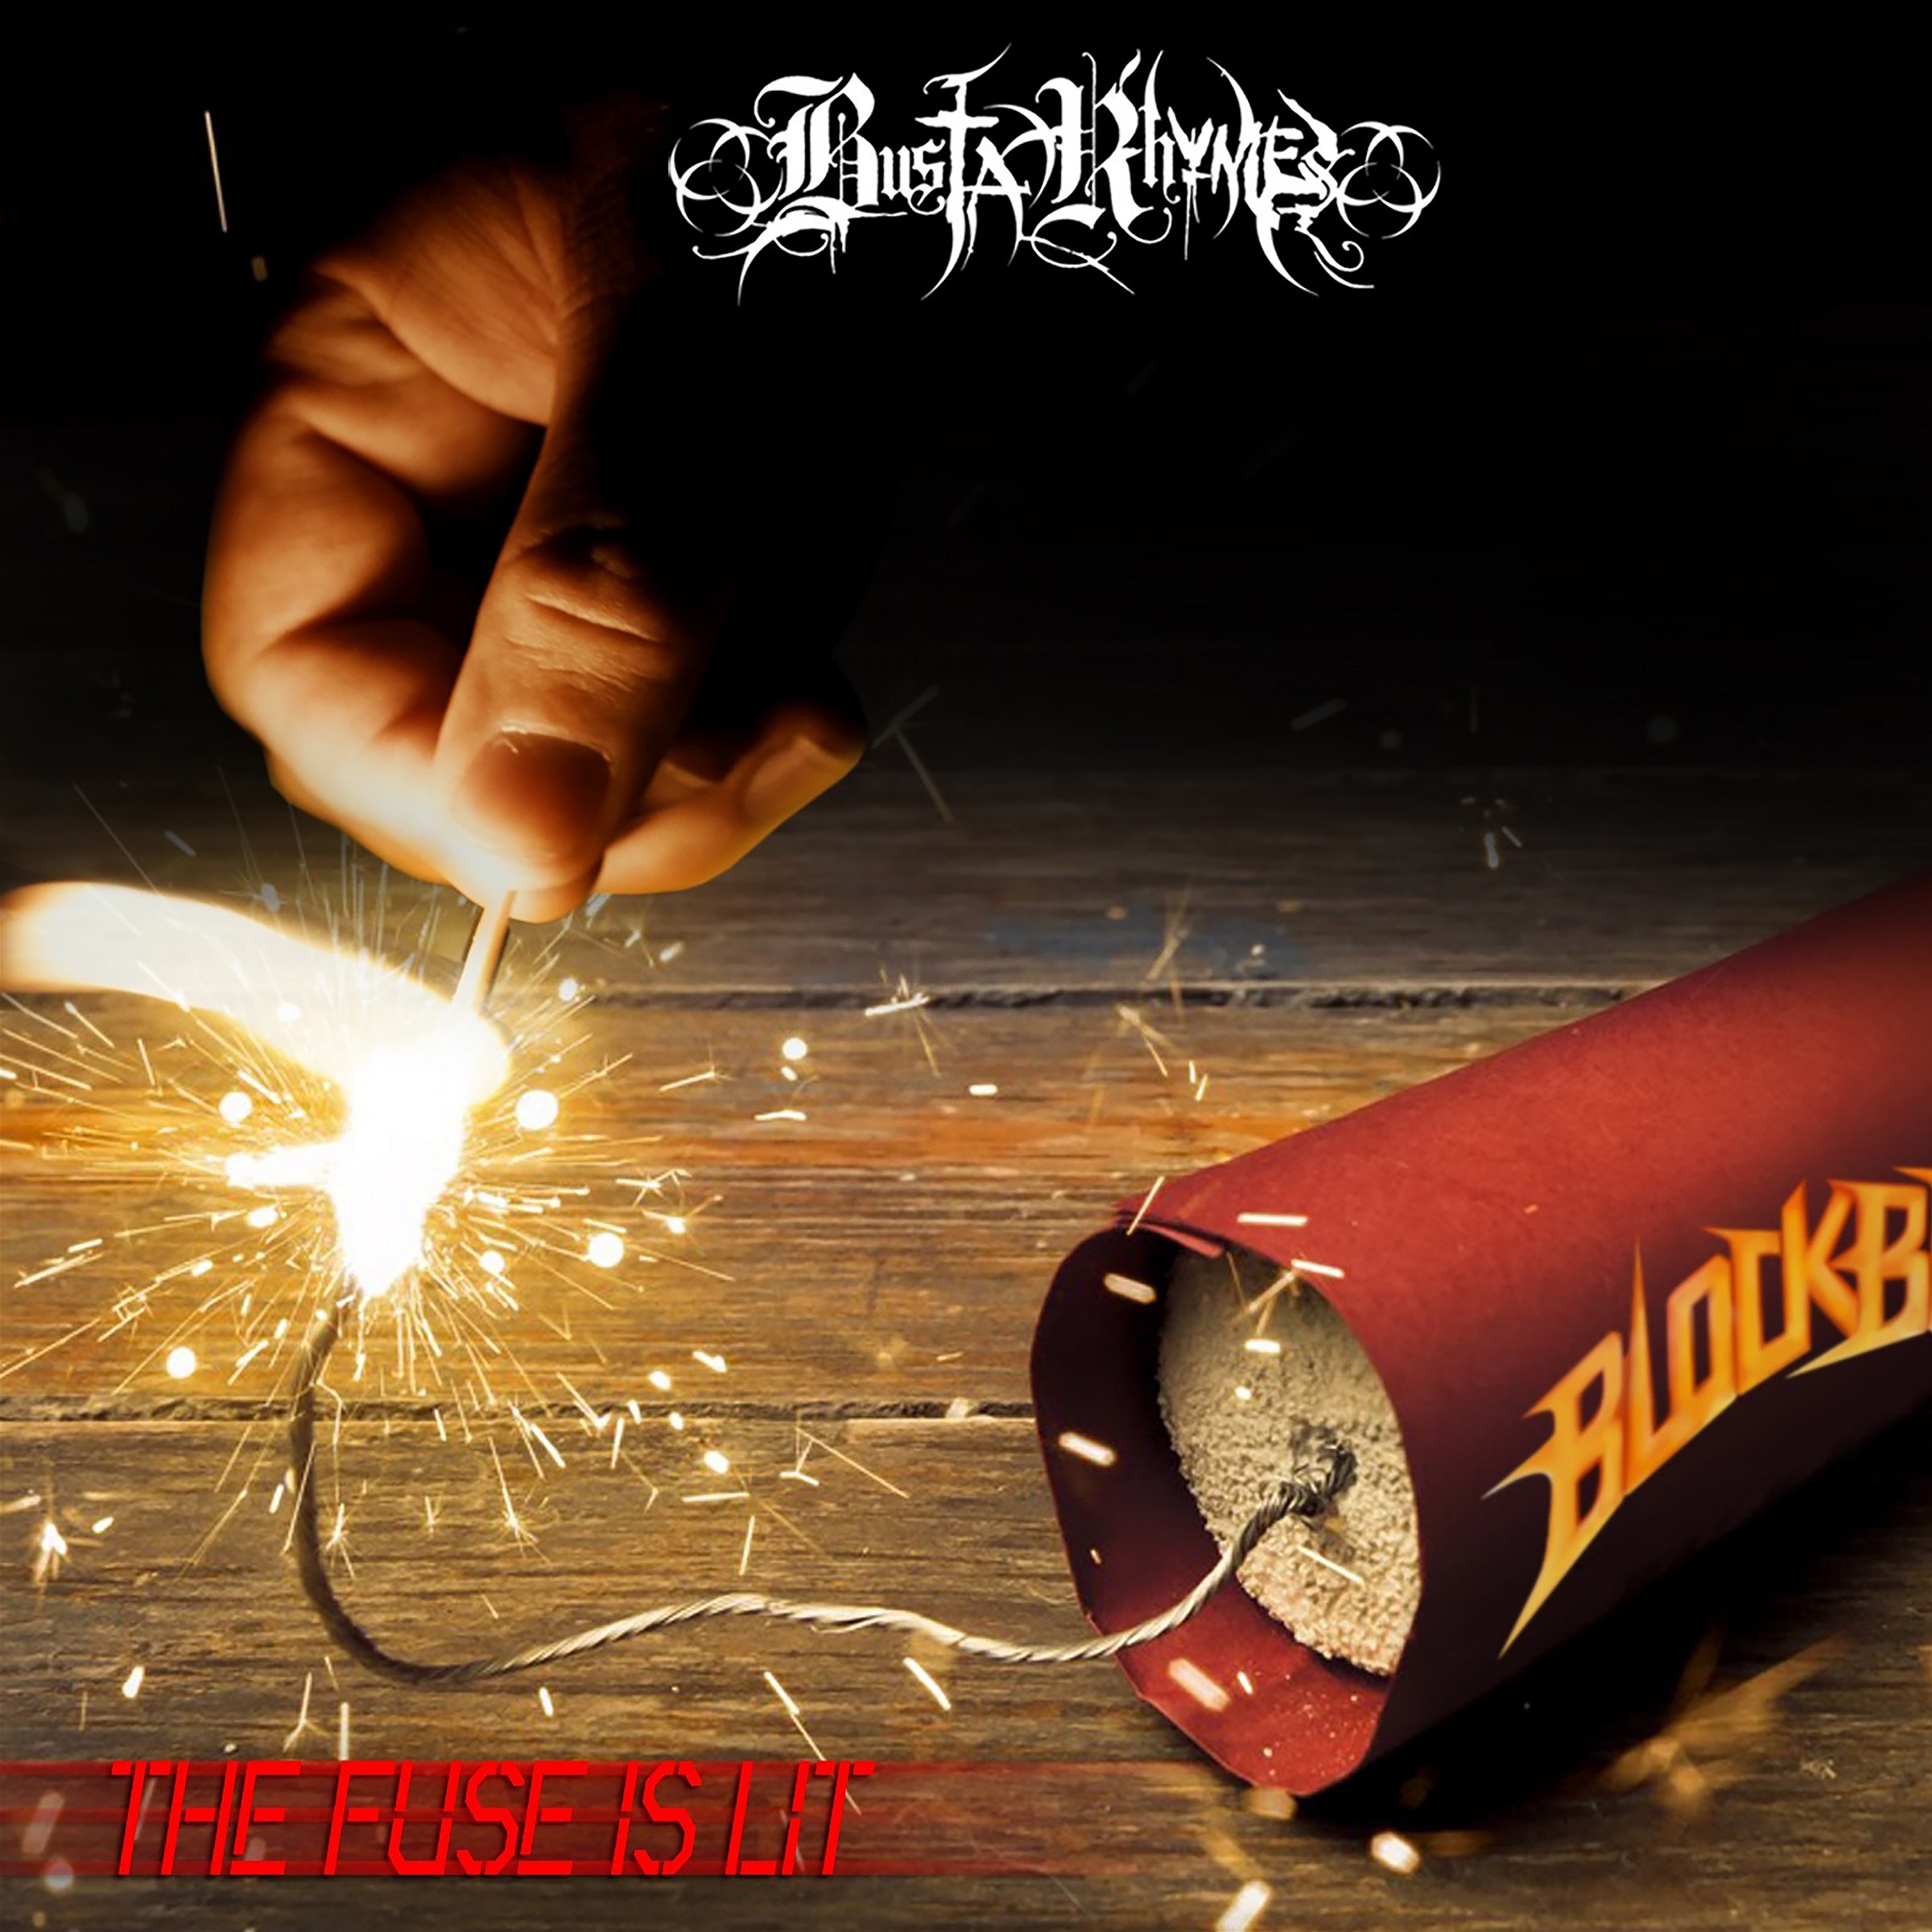 Busta Rhymes - The Fuse Is Lit - Album Cover POSTER - Lost Posters